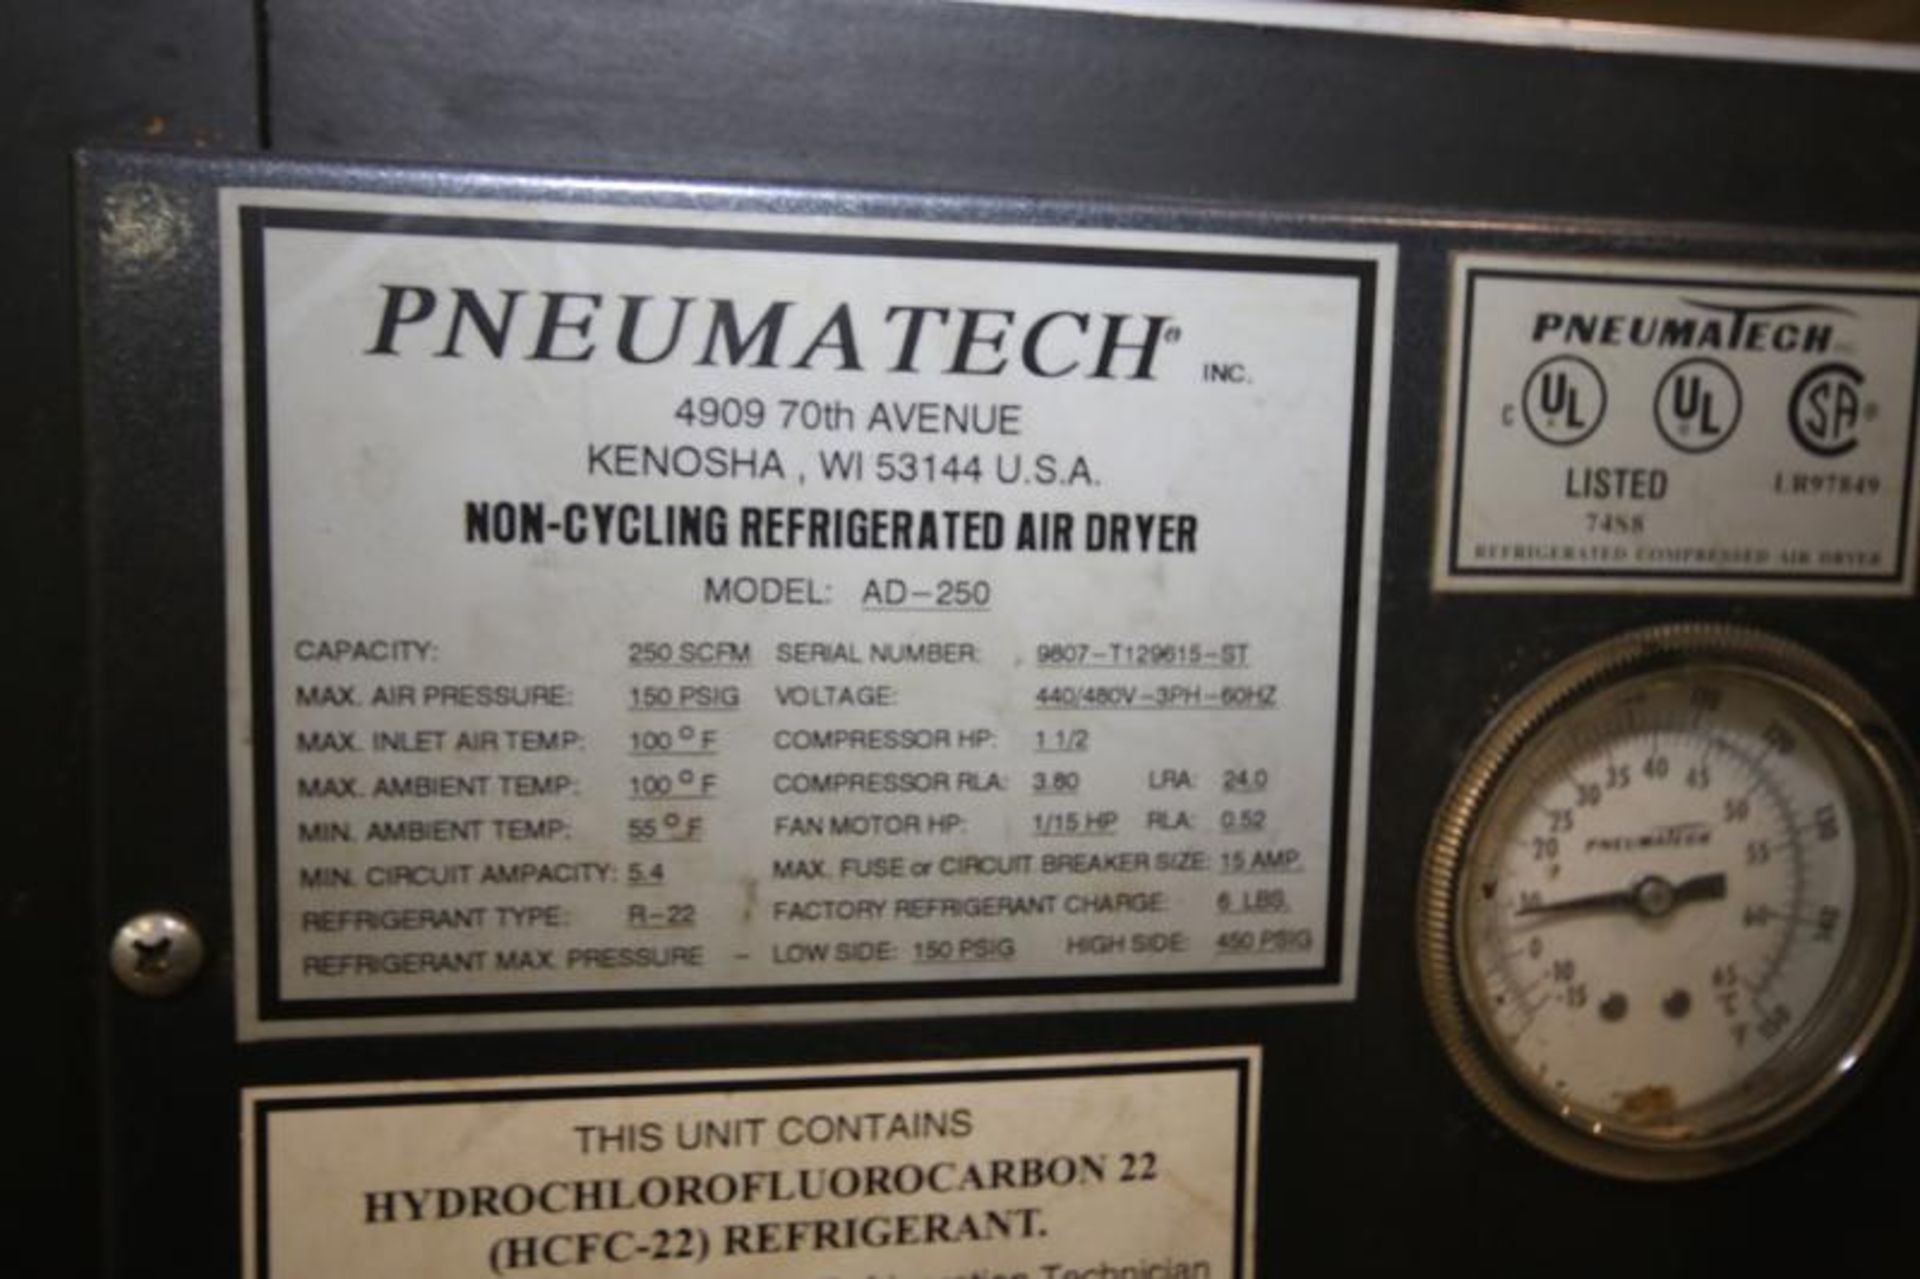 Pneumatic Refrigerated Air Dryer, Model AD-250, SN 9807-T129615-ST, 150 max psi, R-22 Refrigerant, - Image 3 of 3